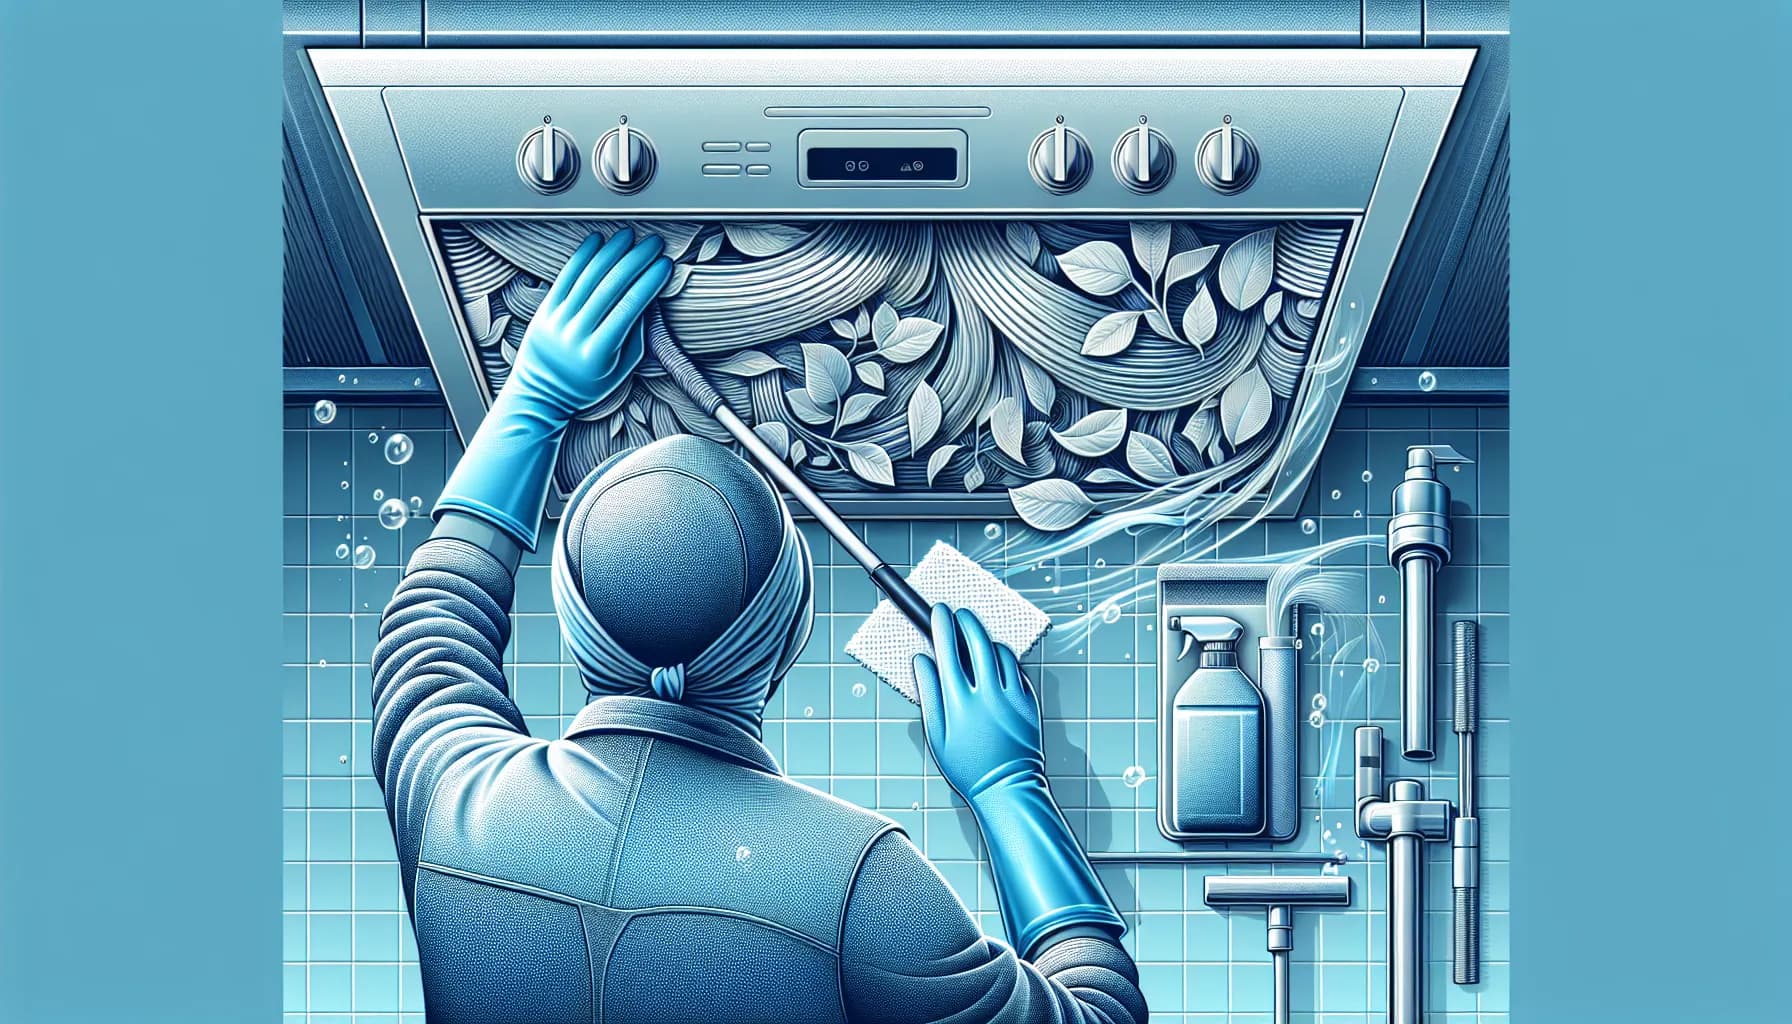 Person in gloves and mask scrubbing shiny oven hood, improving air quality.